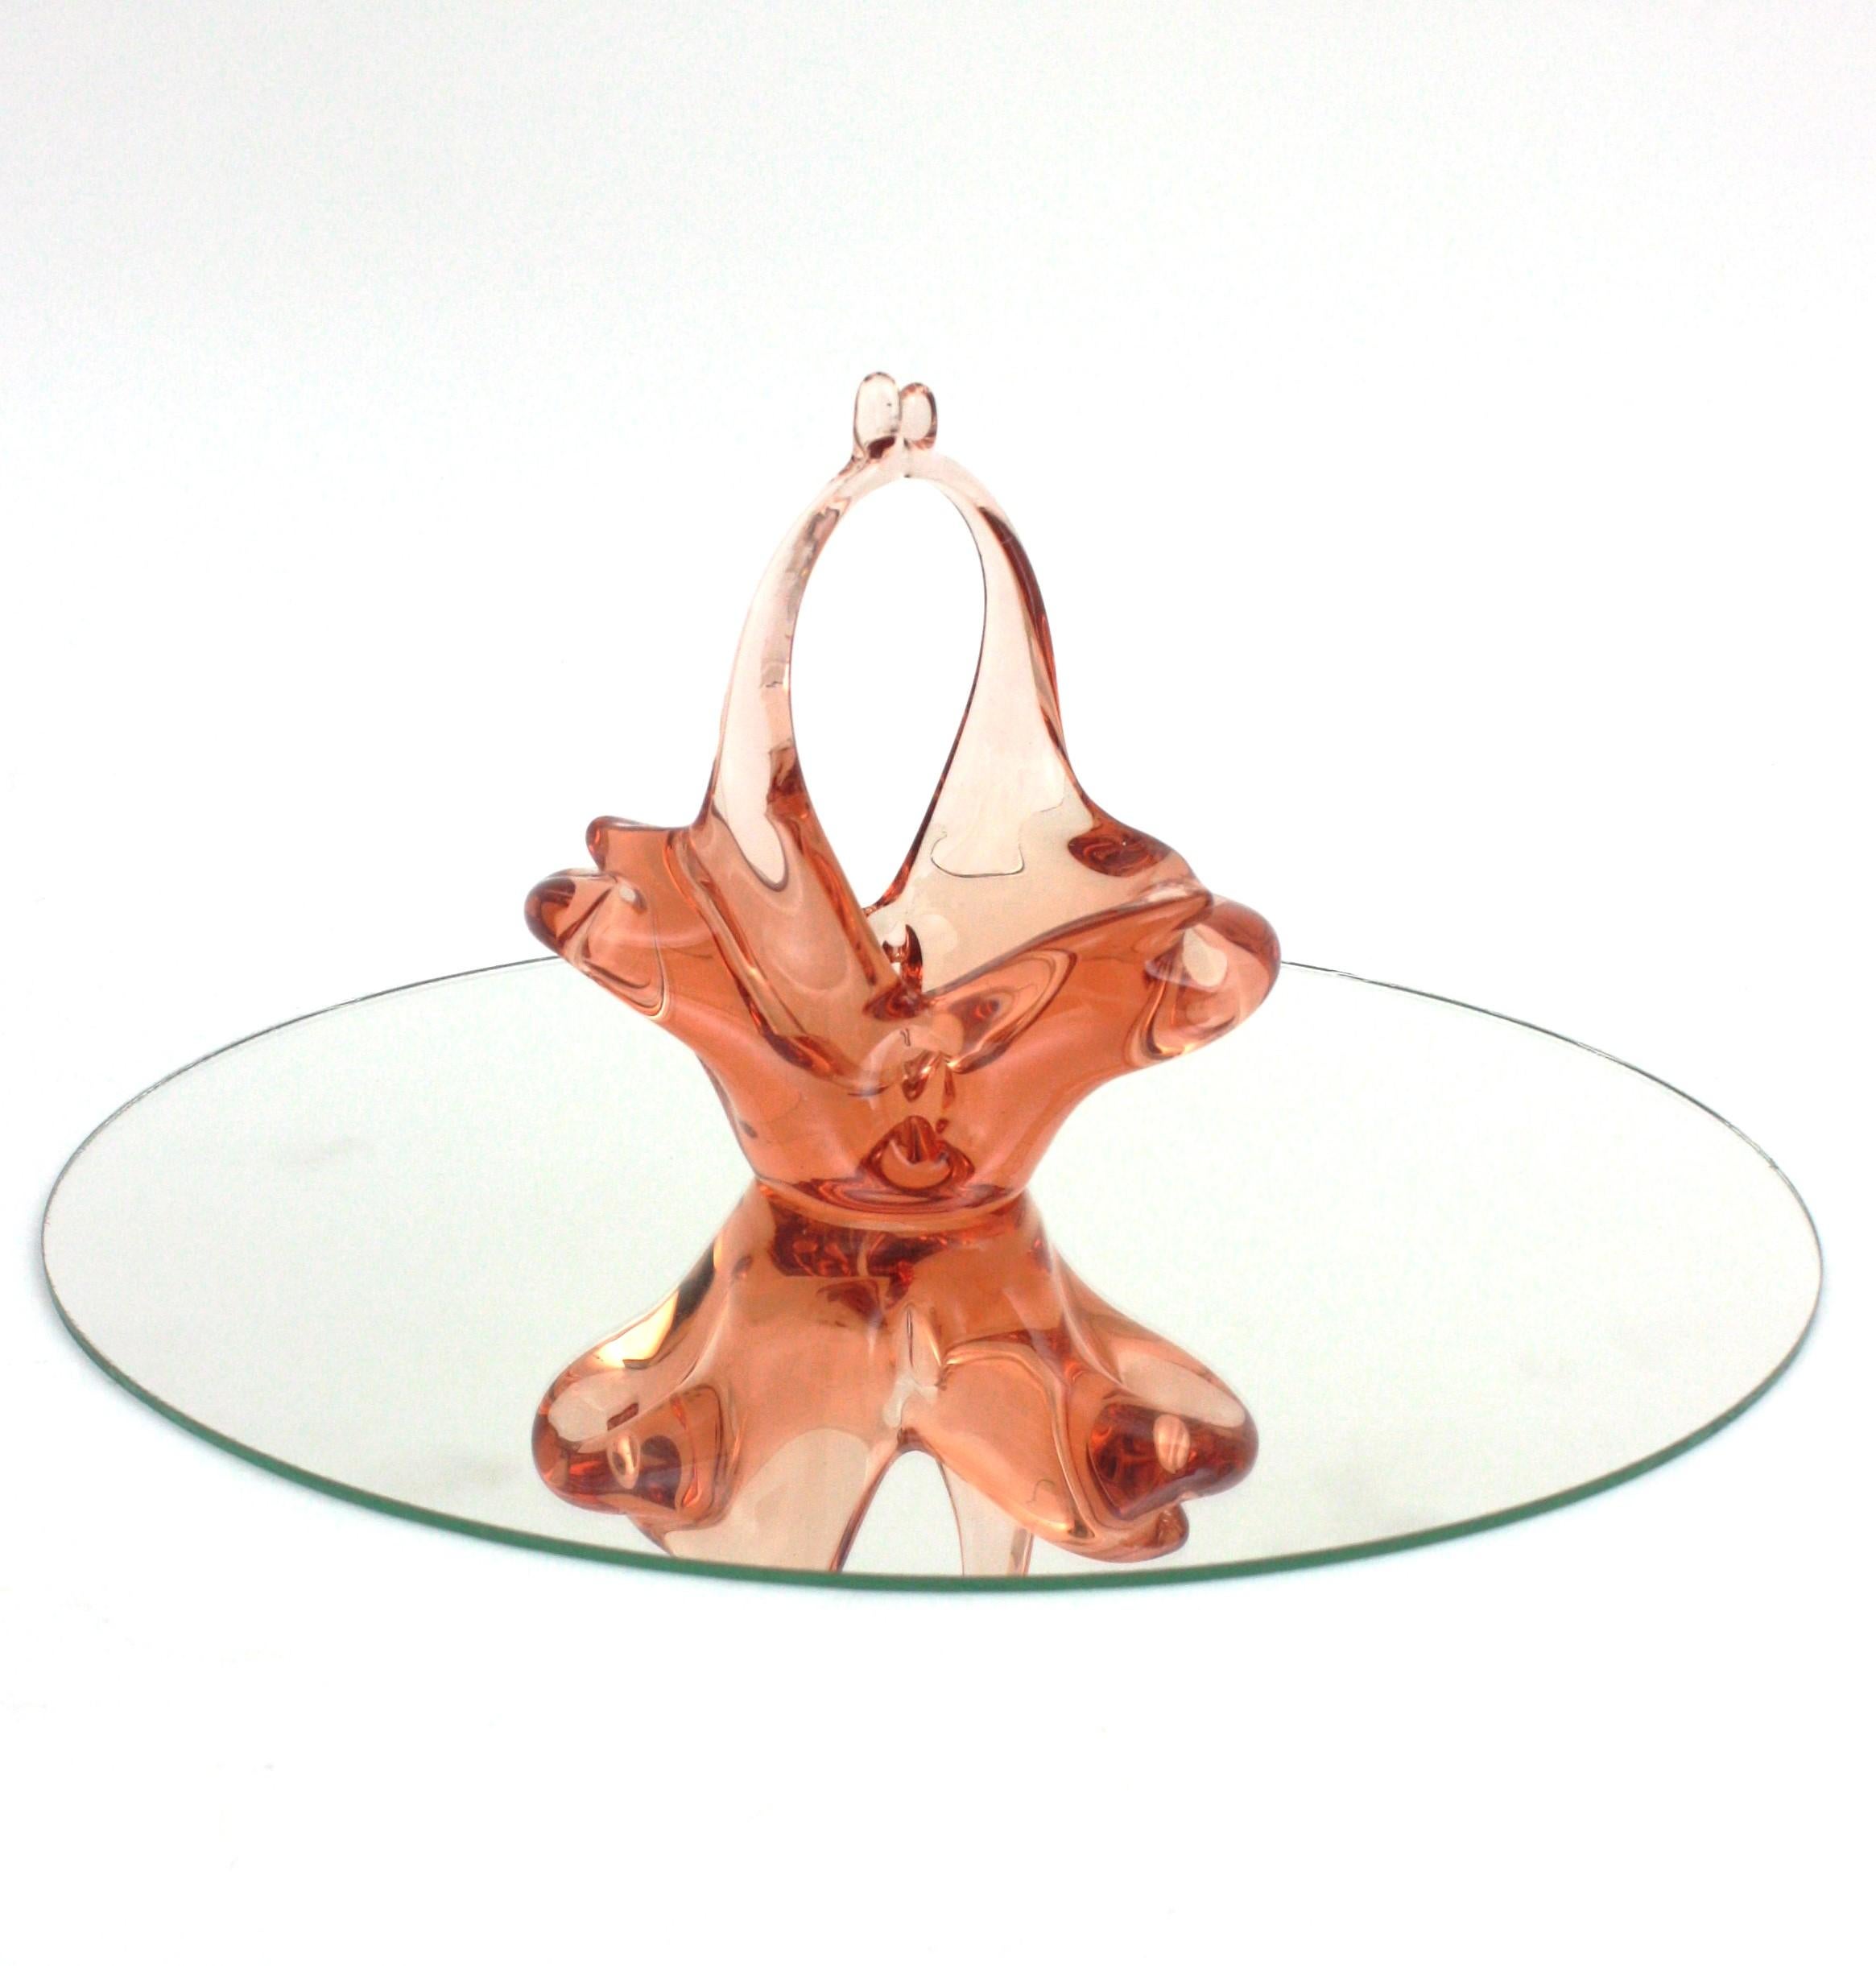 Hand-Crafted Murano Peach Italian Art Glass Basket Bowl, 1960s For Sale